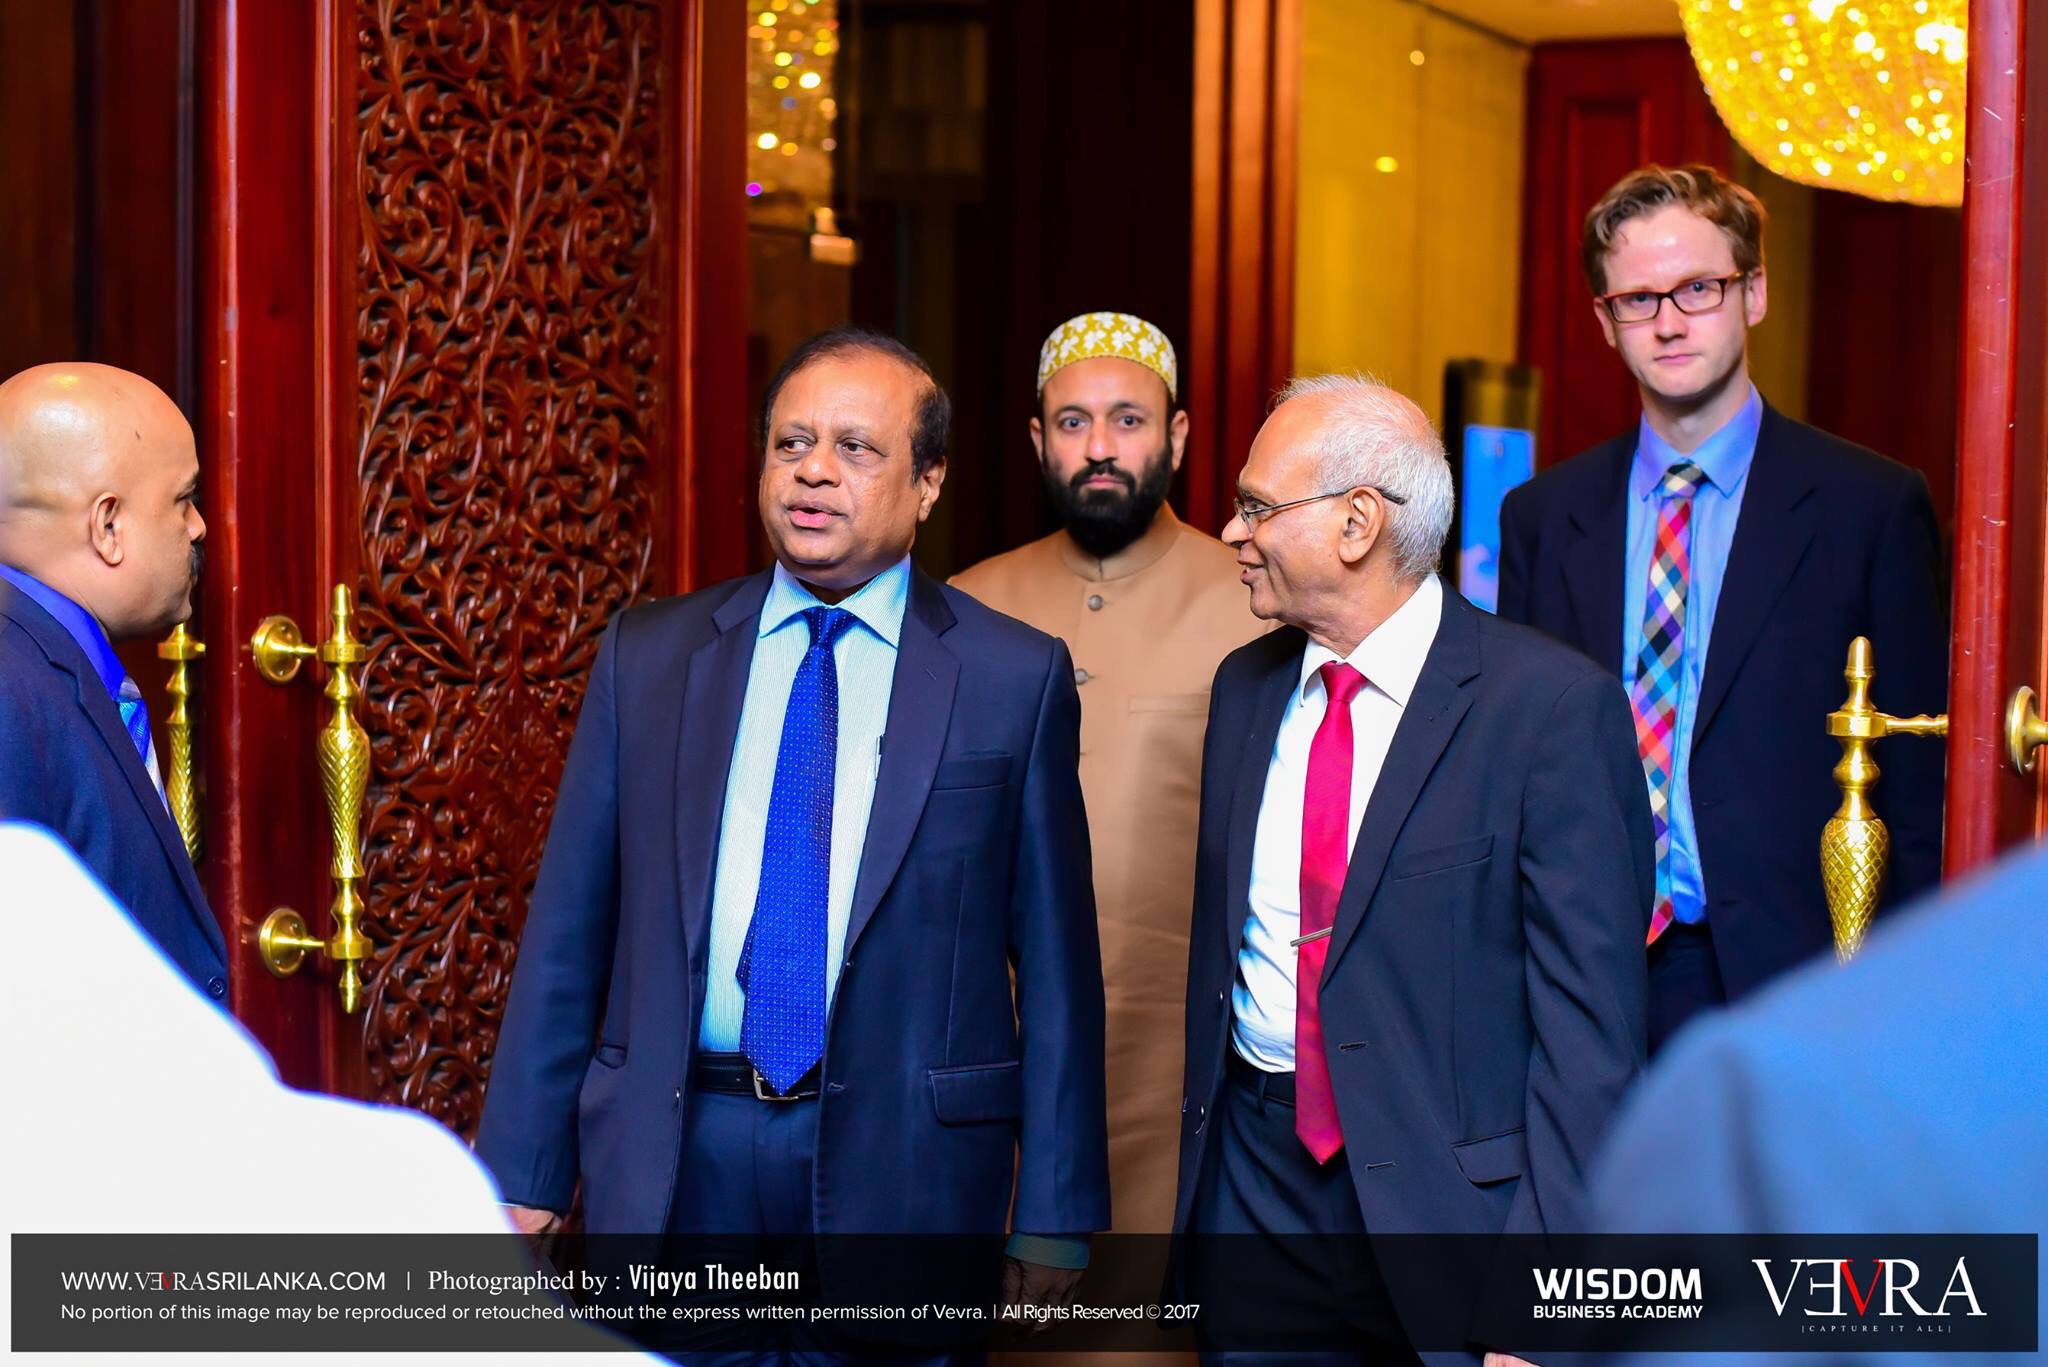 At Colombo Attending Event with Mr. K C Logesgwaran - Governor Western Province Colombo